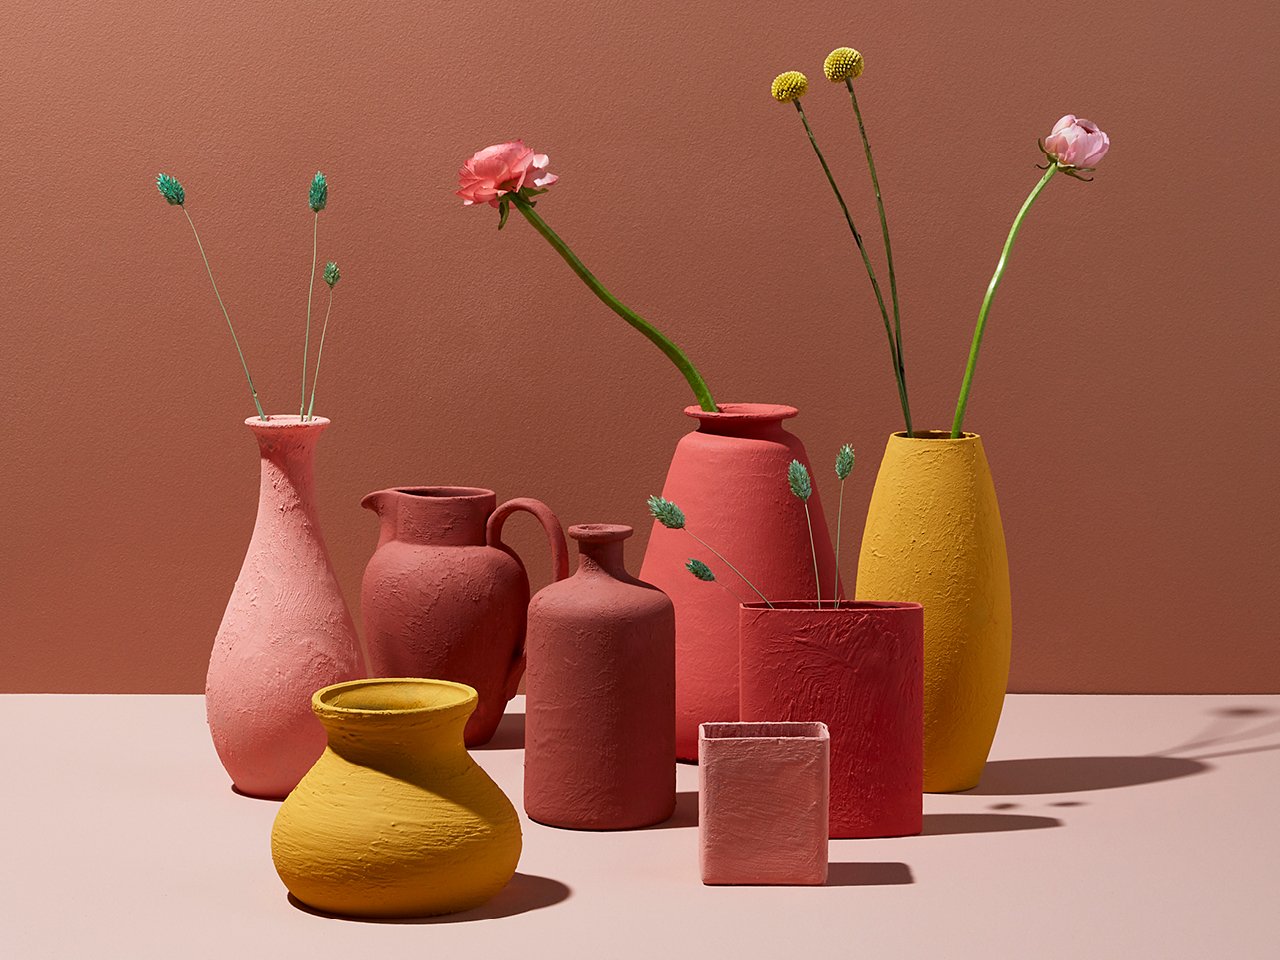 Several painted thrift store vases with flower stalks laid on a surface